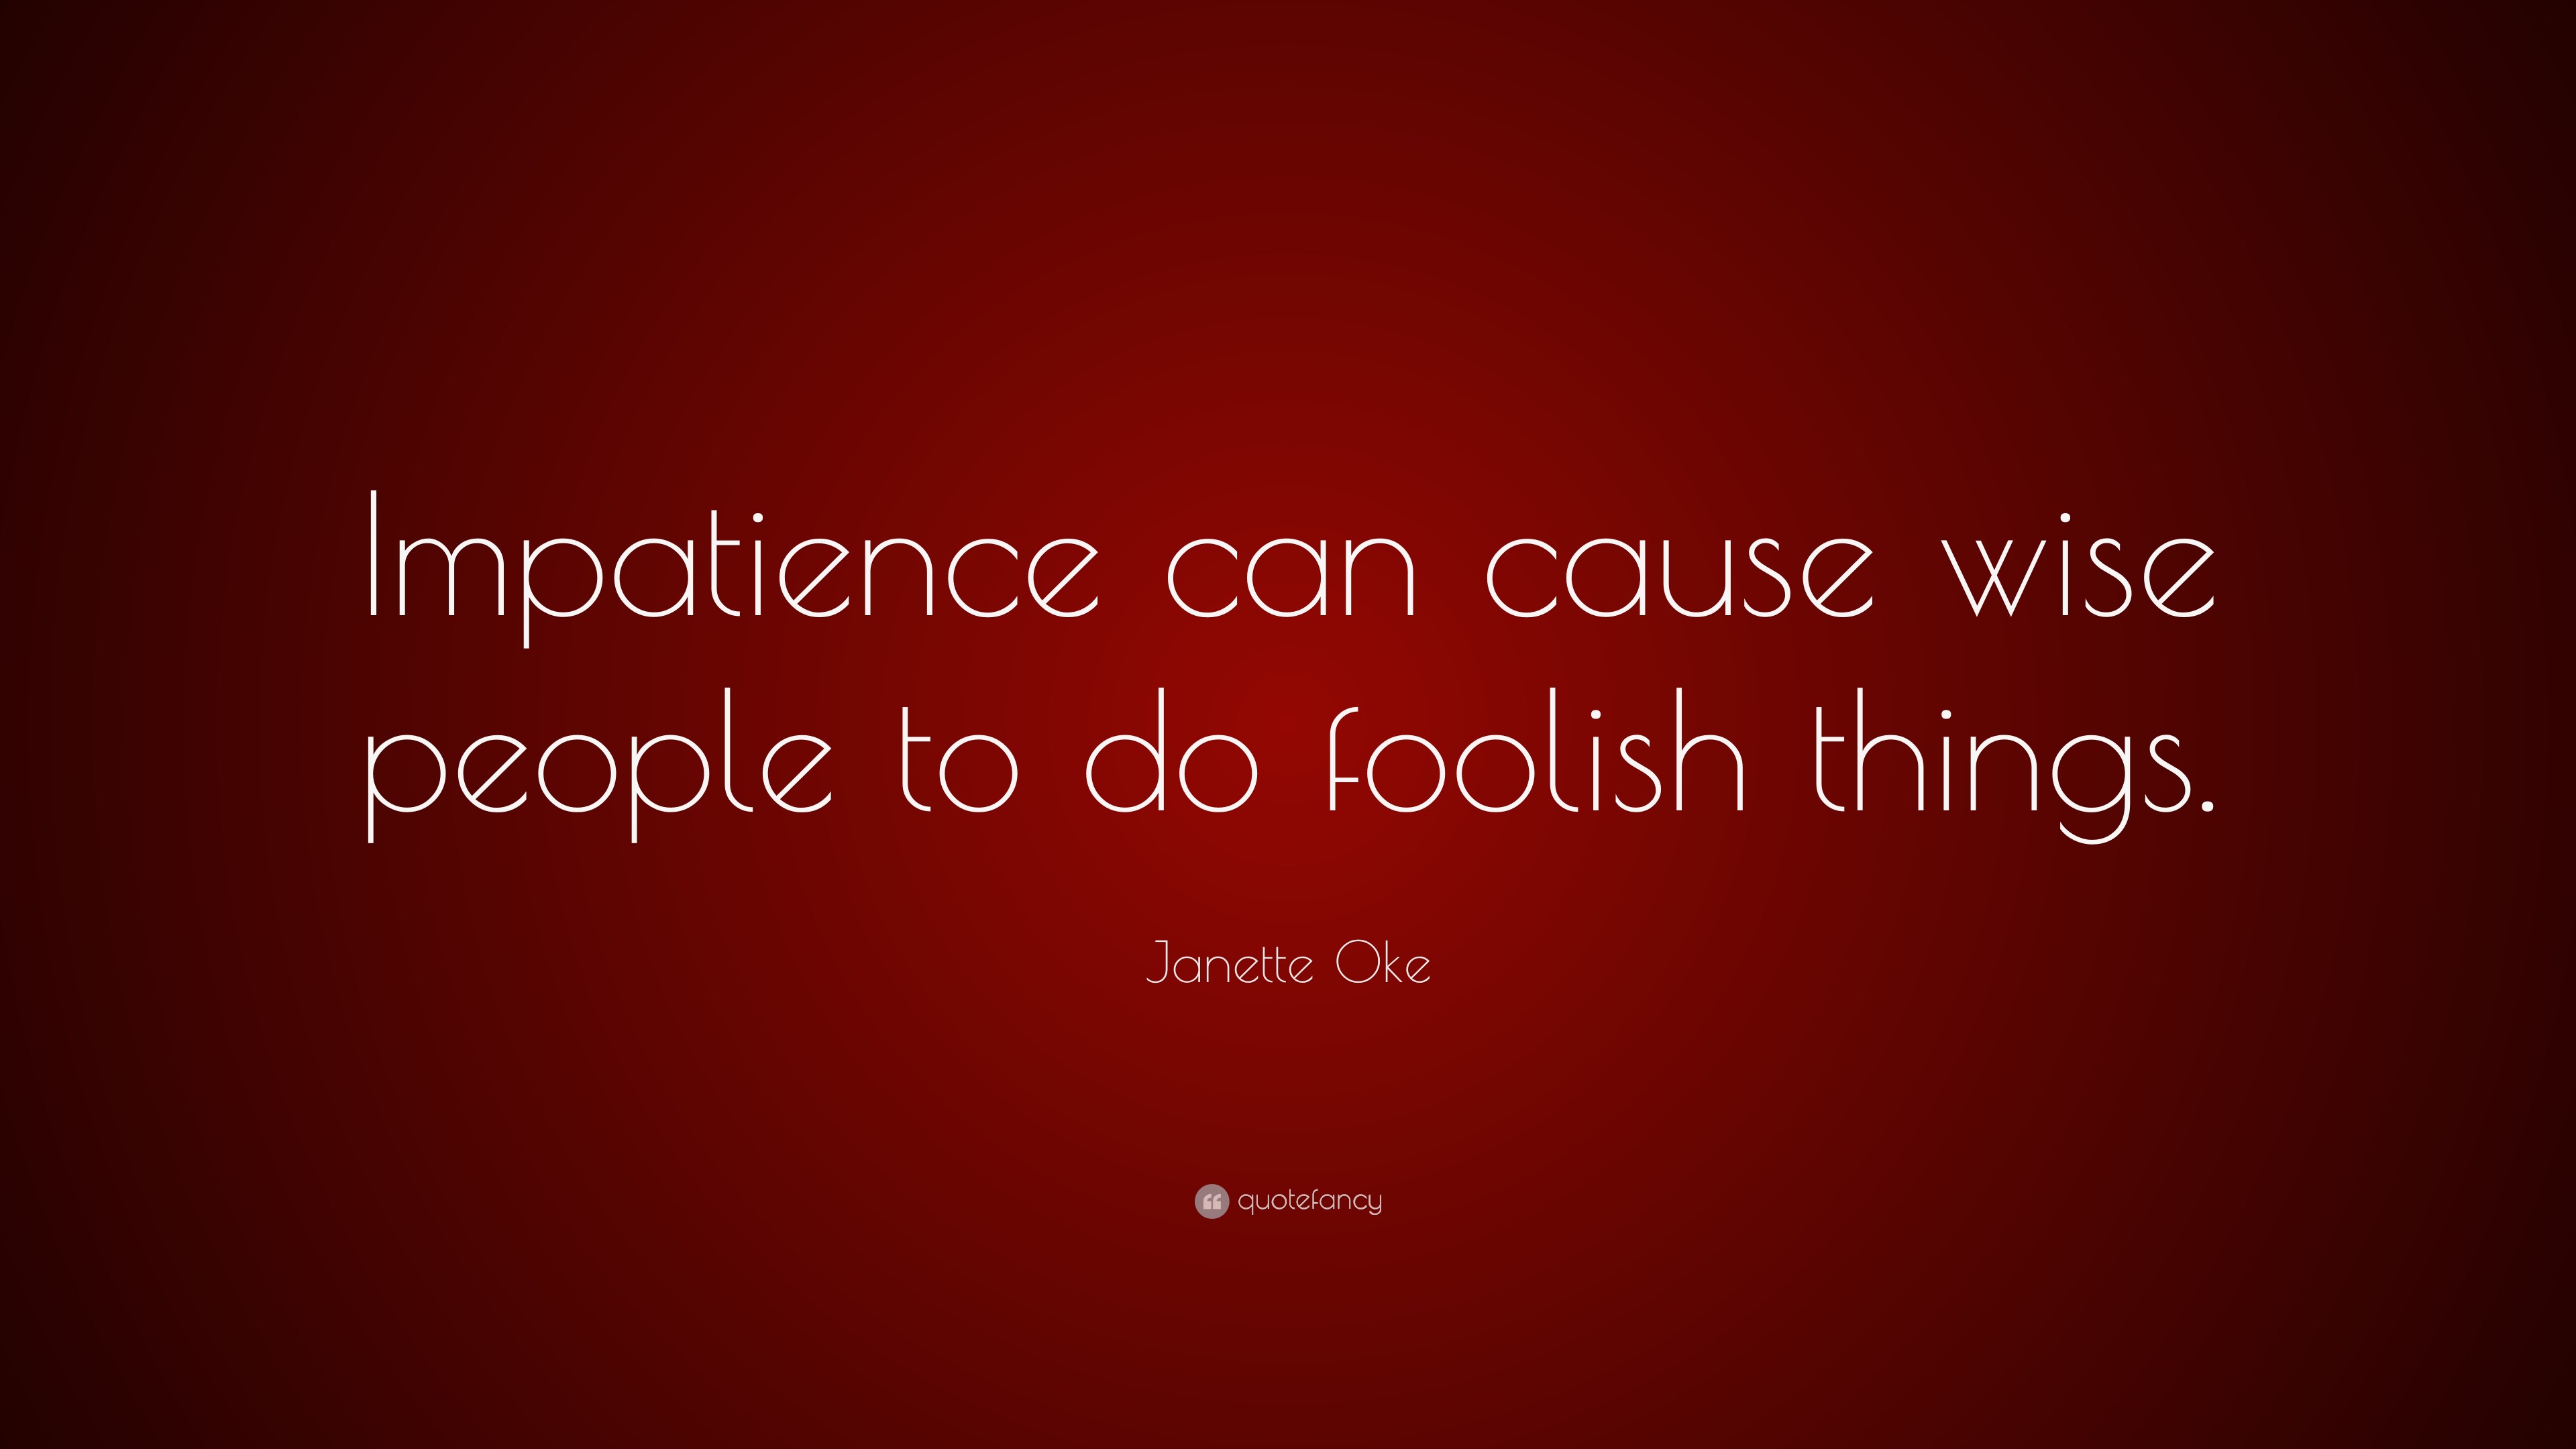 Janette Oke Quote: “Impatience can cause wise people to do foolish things.”